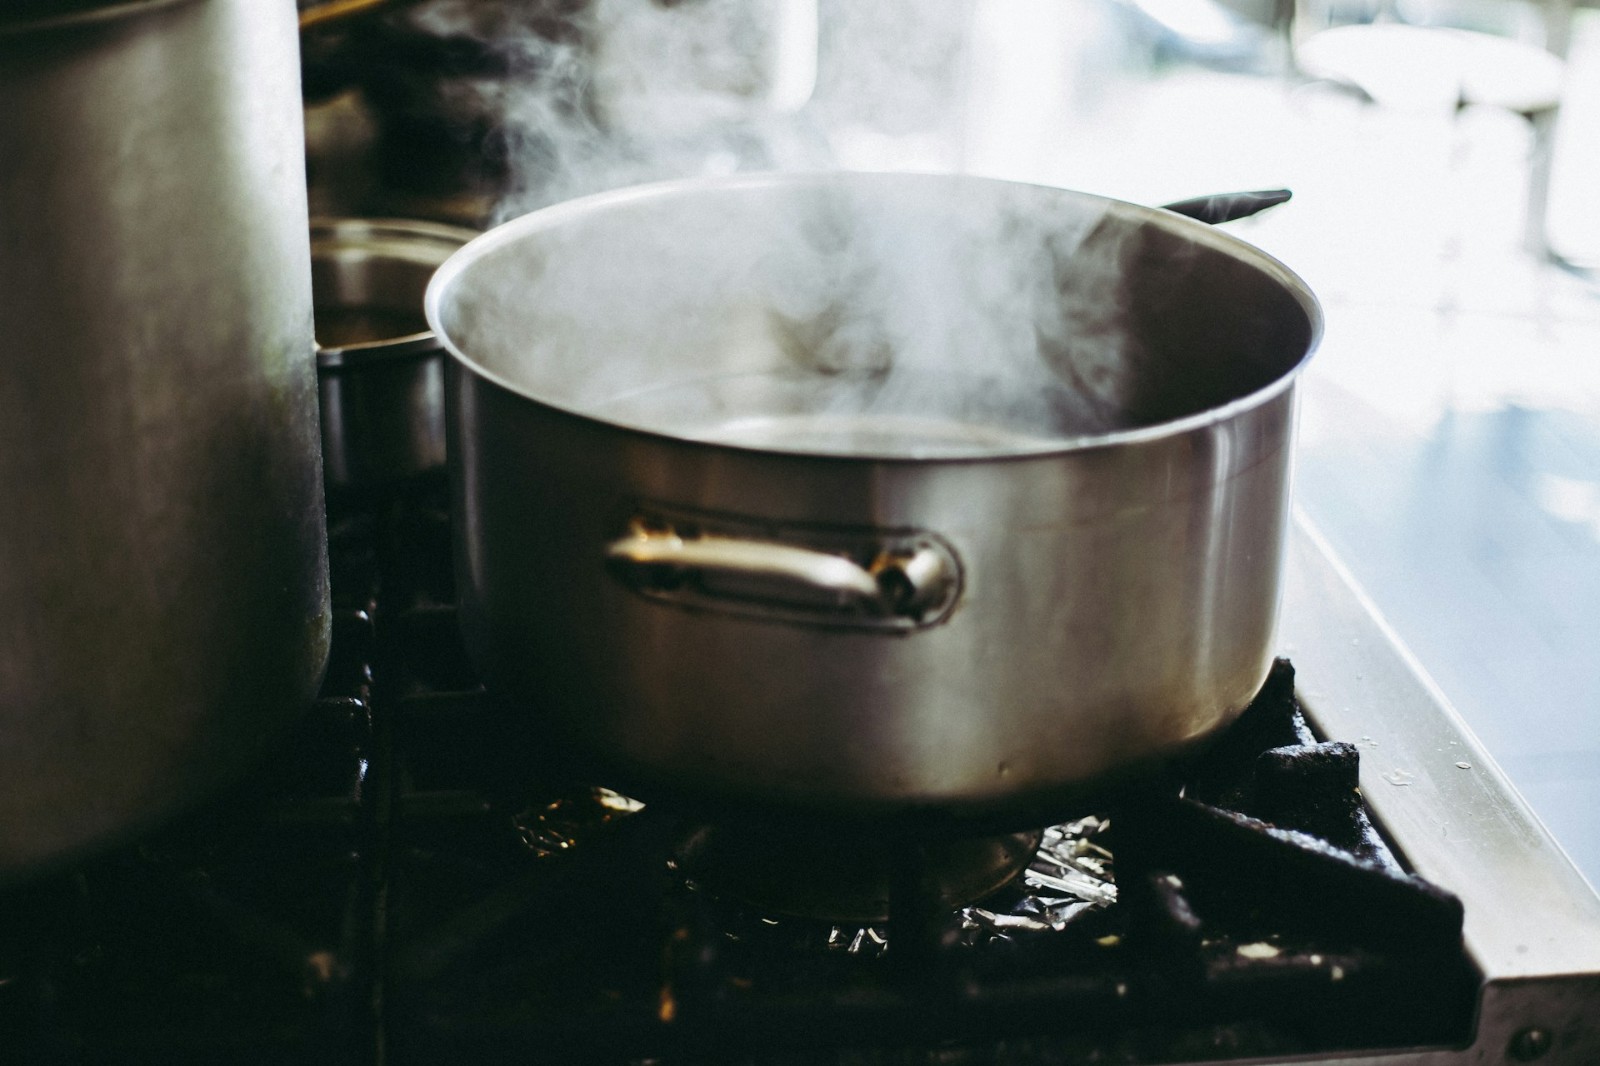 A large pot of boiling water on a stove top.